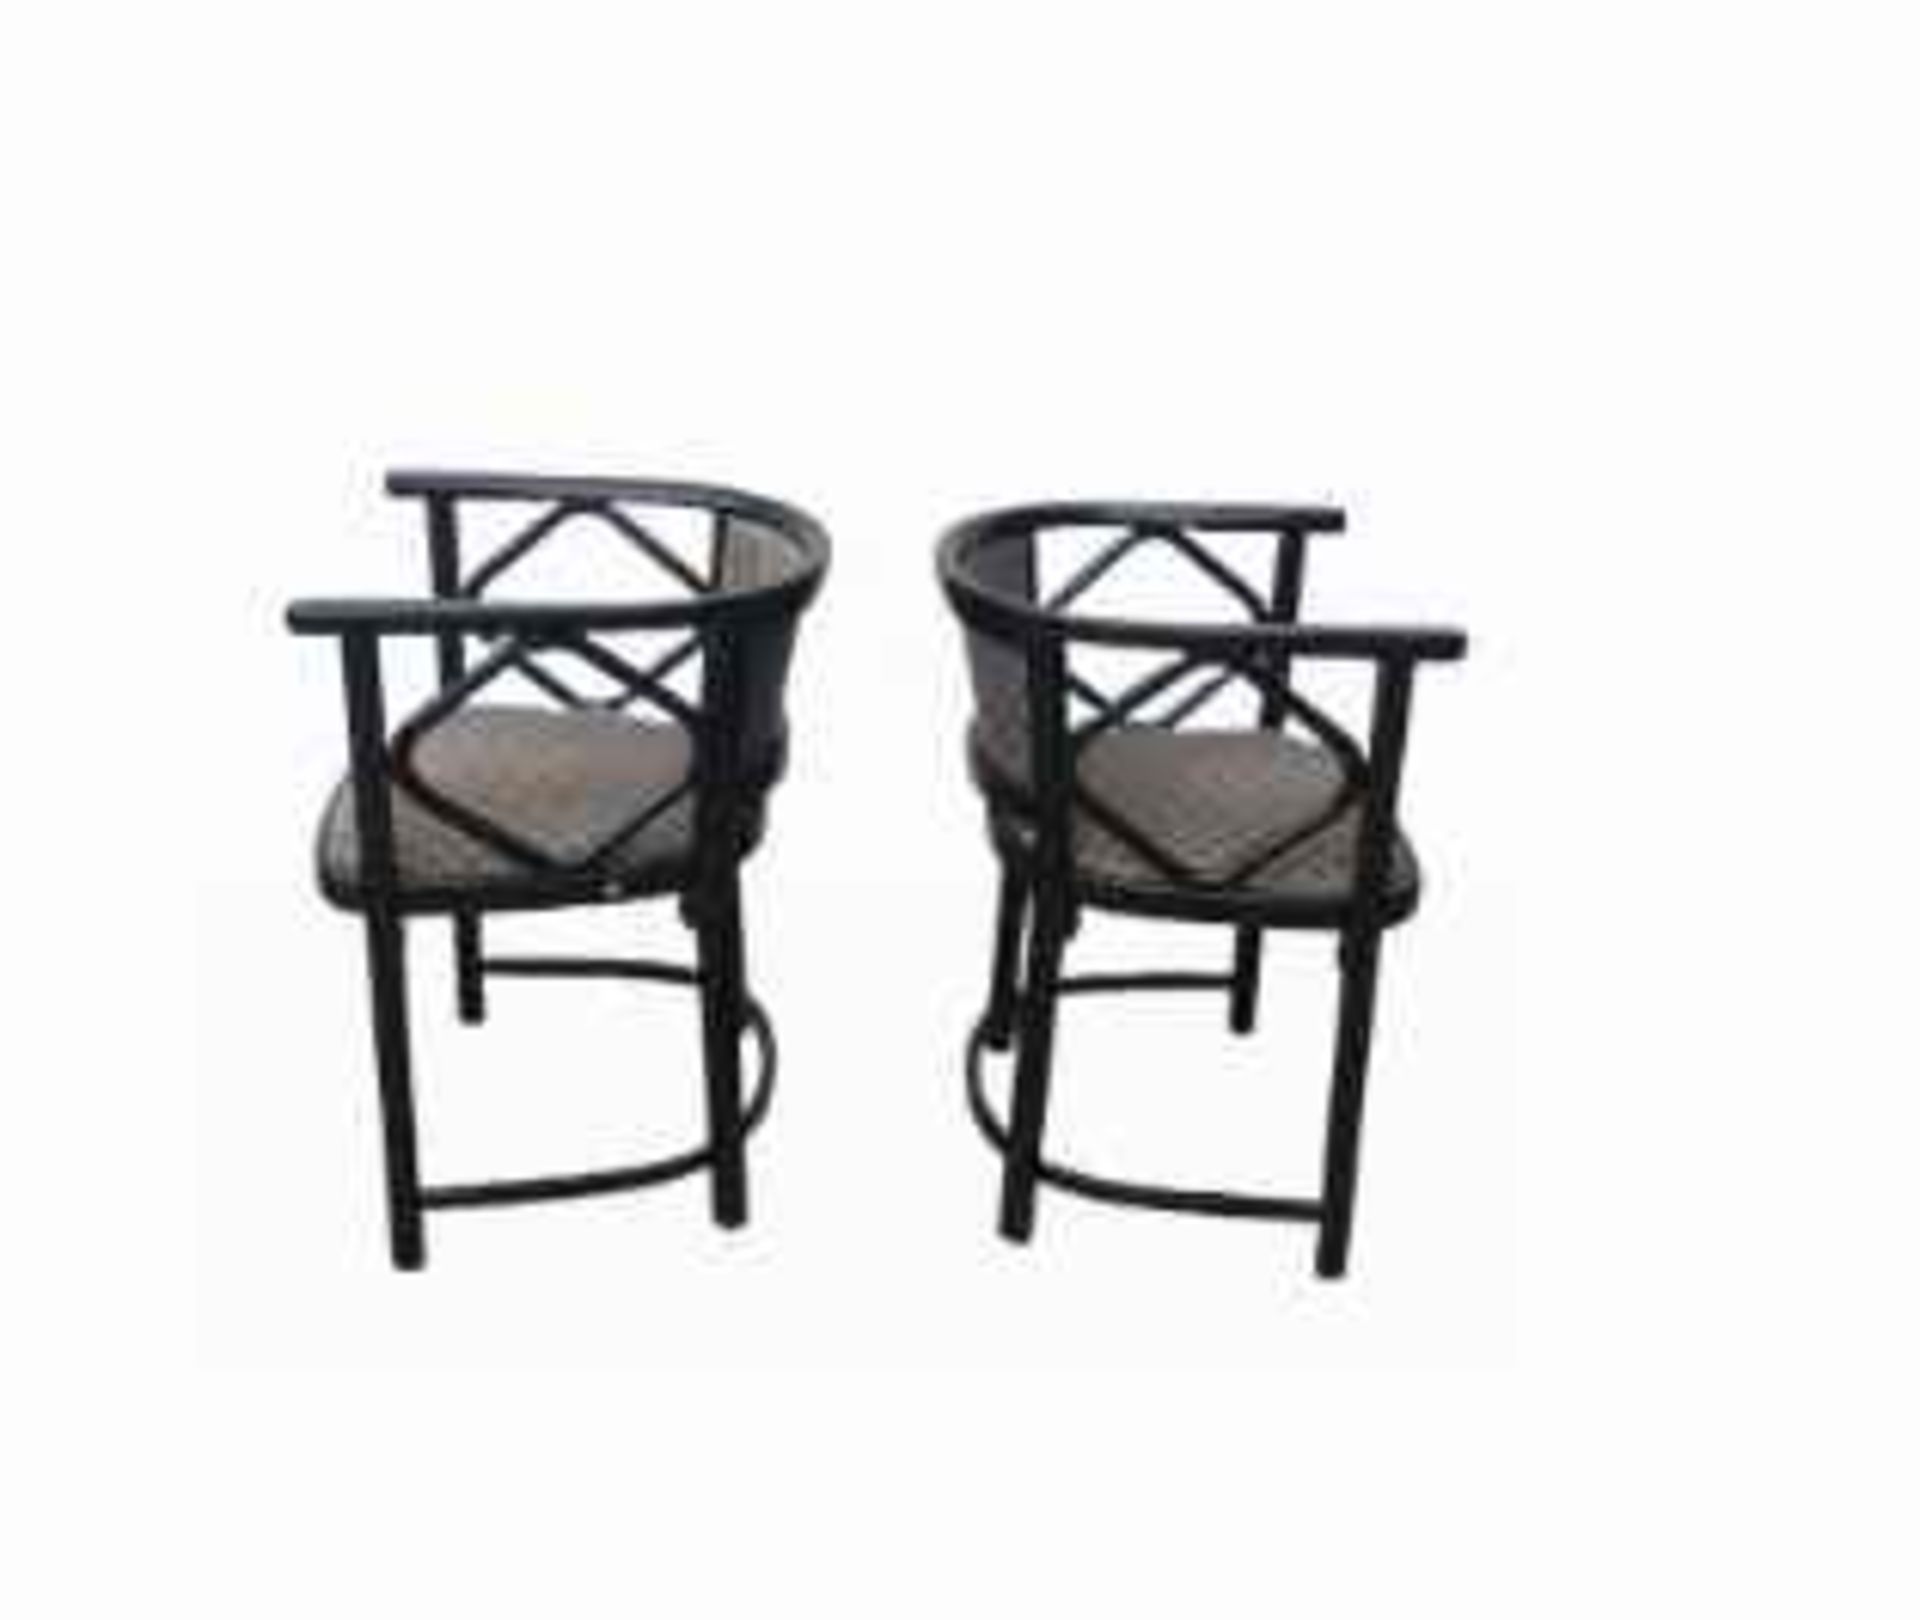 Thonet | Varient "Fledermaus" | 3 Piece Set: 2 Chairs & 1 Table - Image 4 of 8